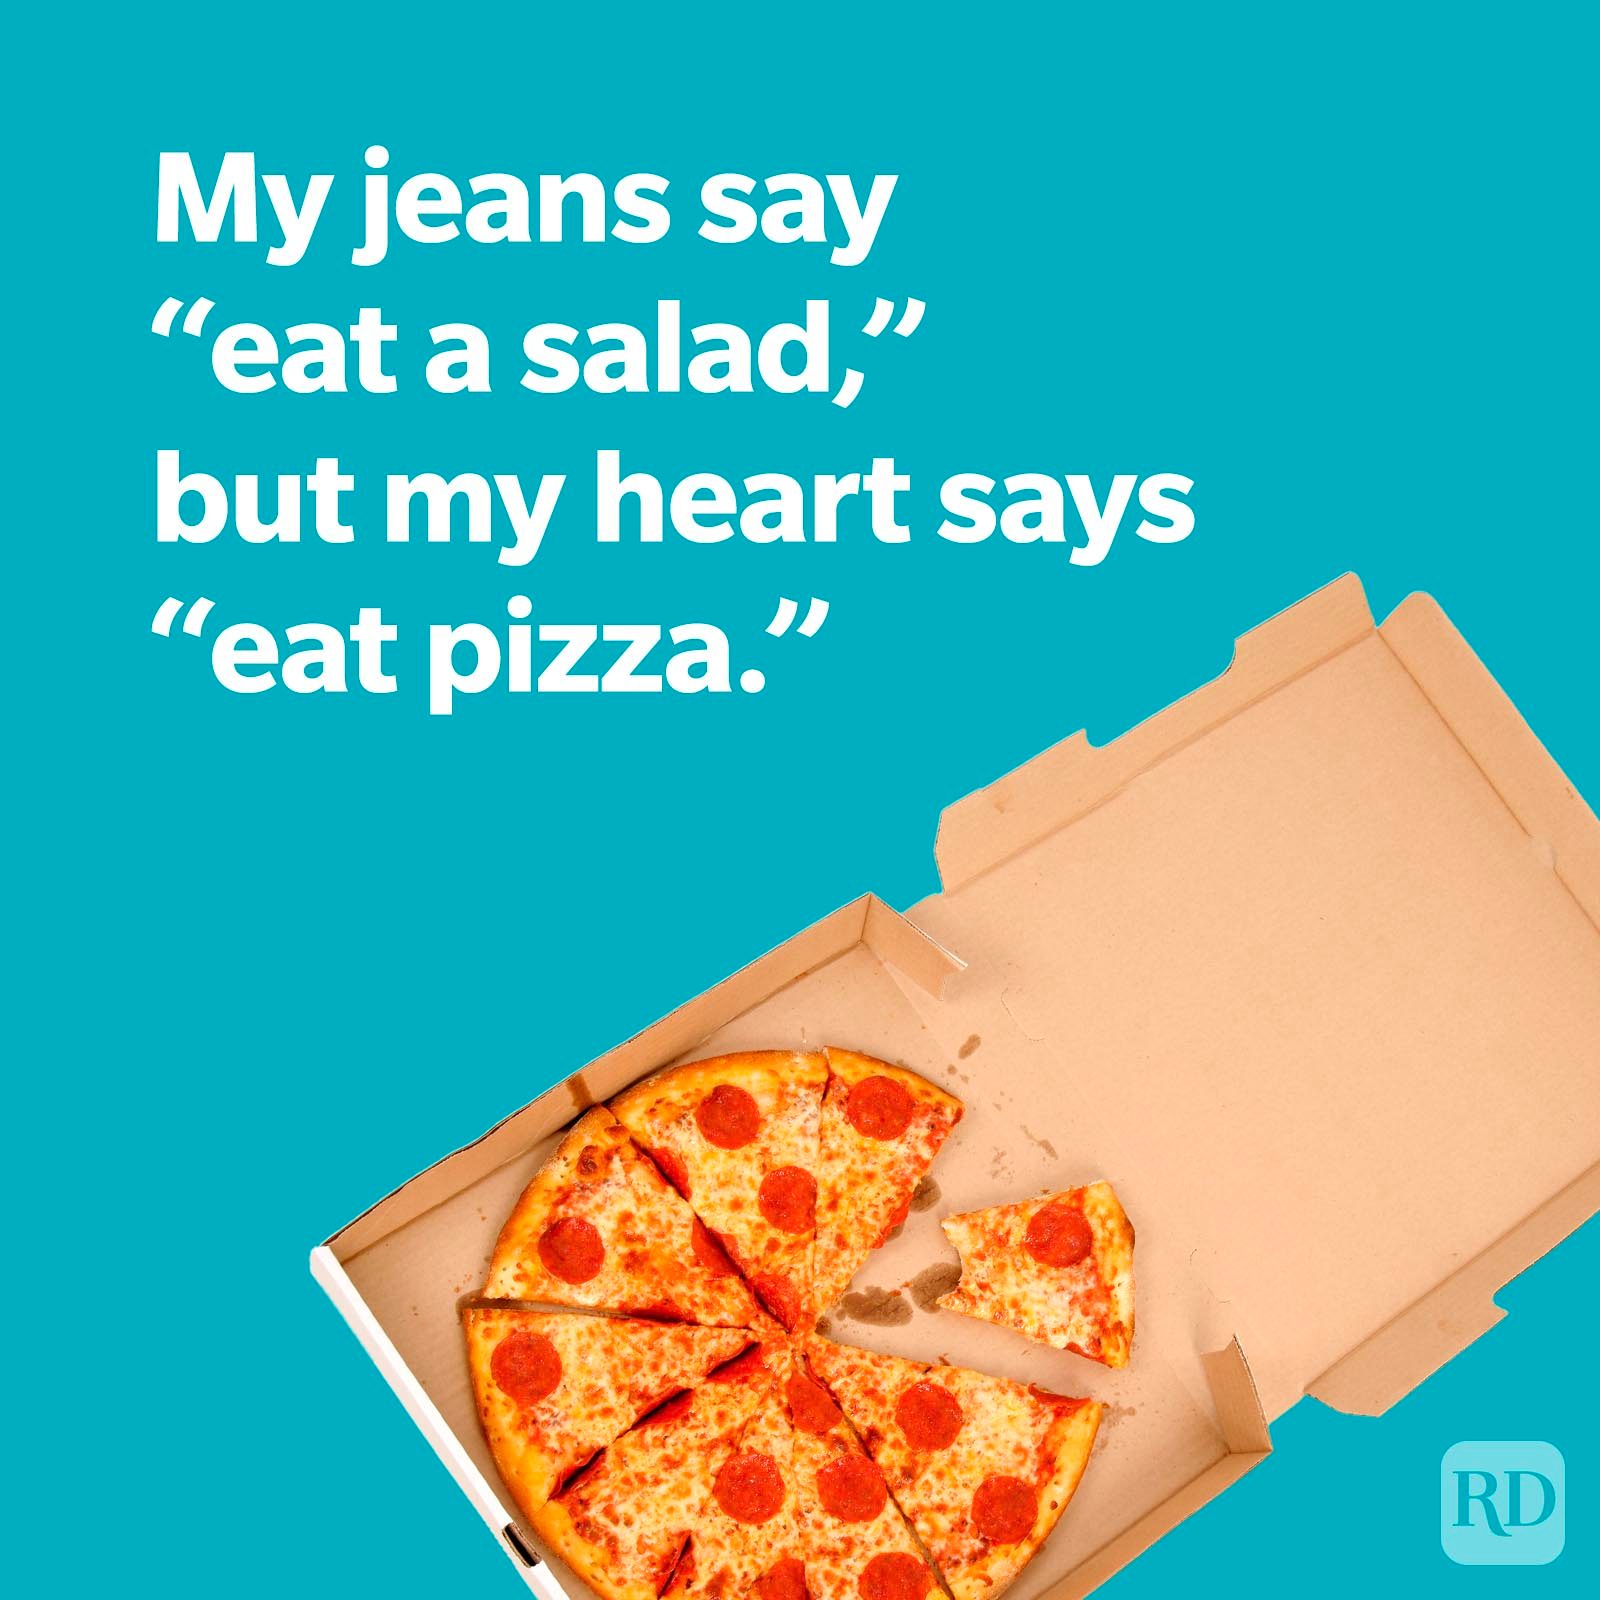 My jeans say "eat a salad," but my heart says "eat pizza."